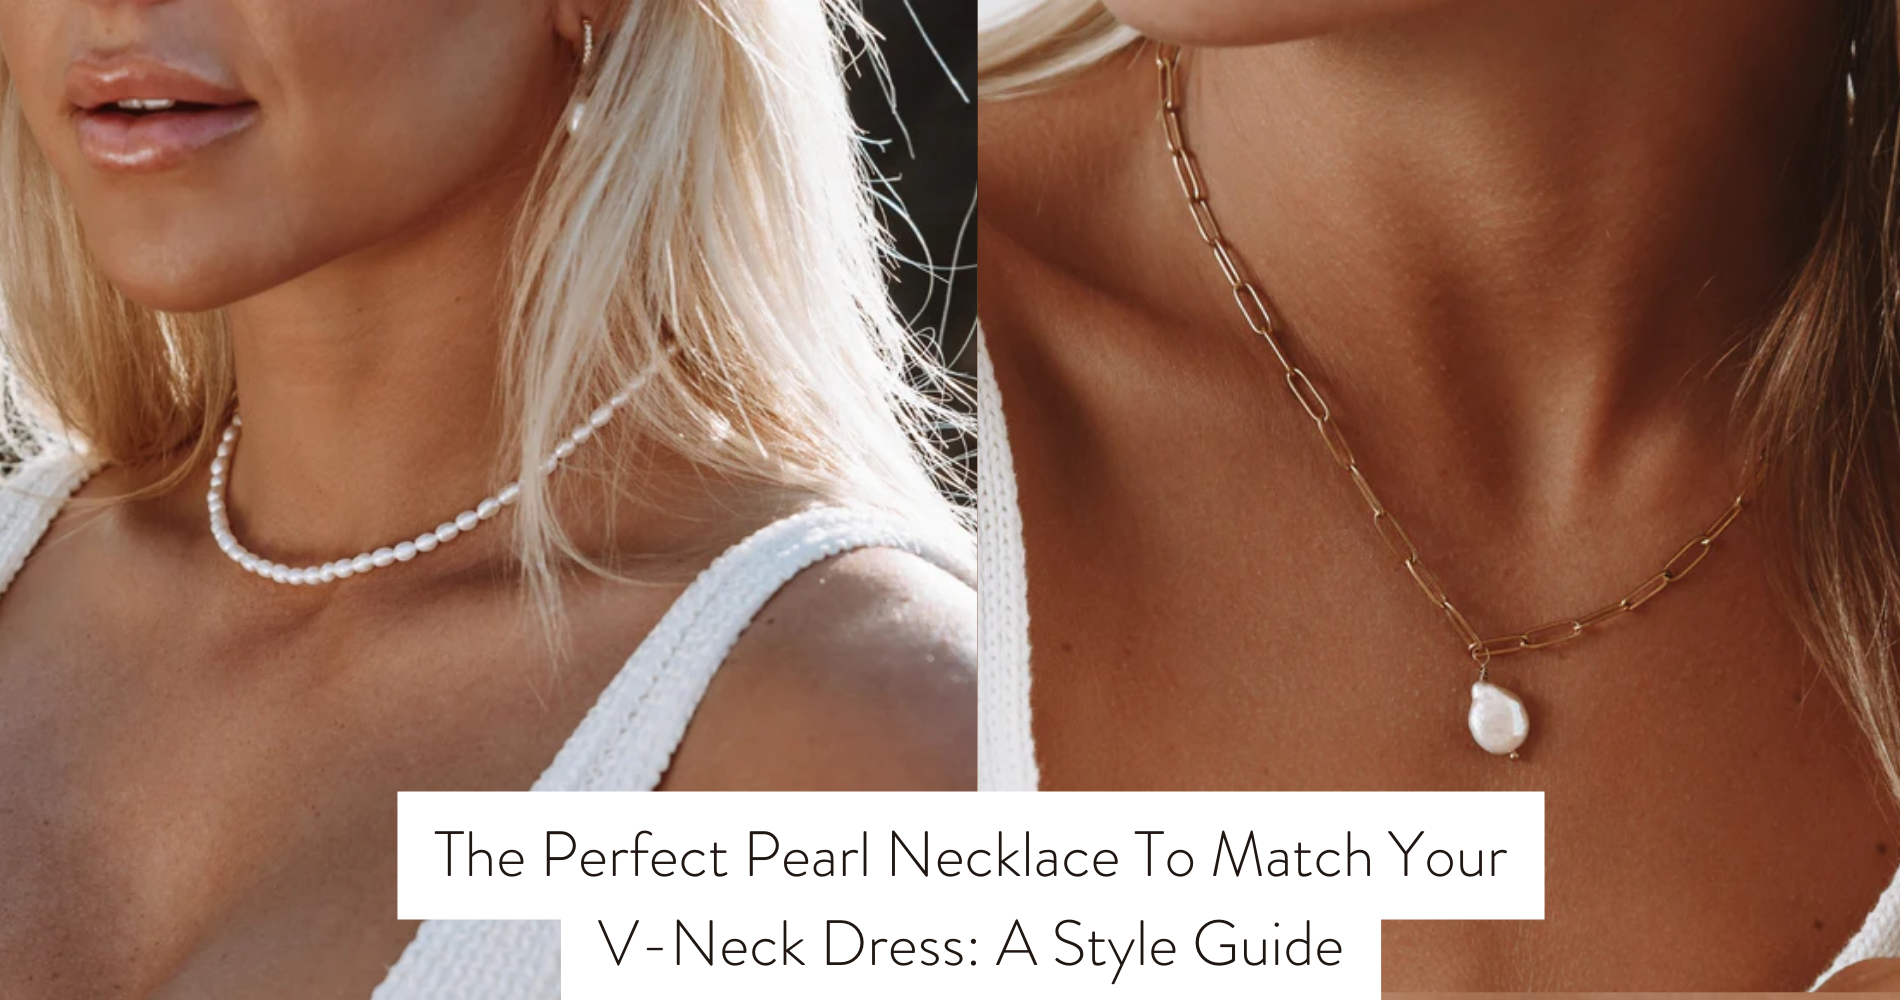 How to select the perfect necklace for your dress - Quora